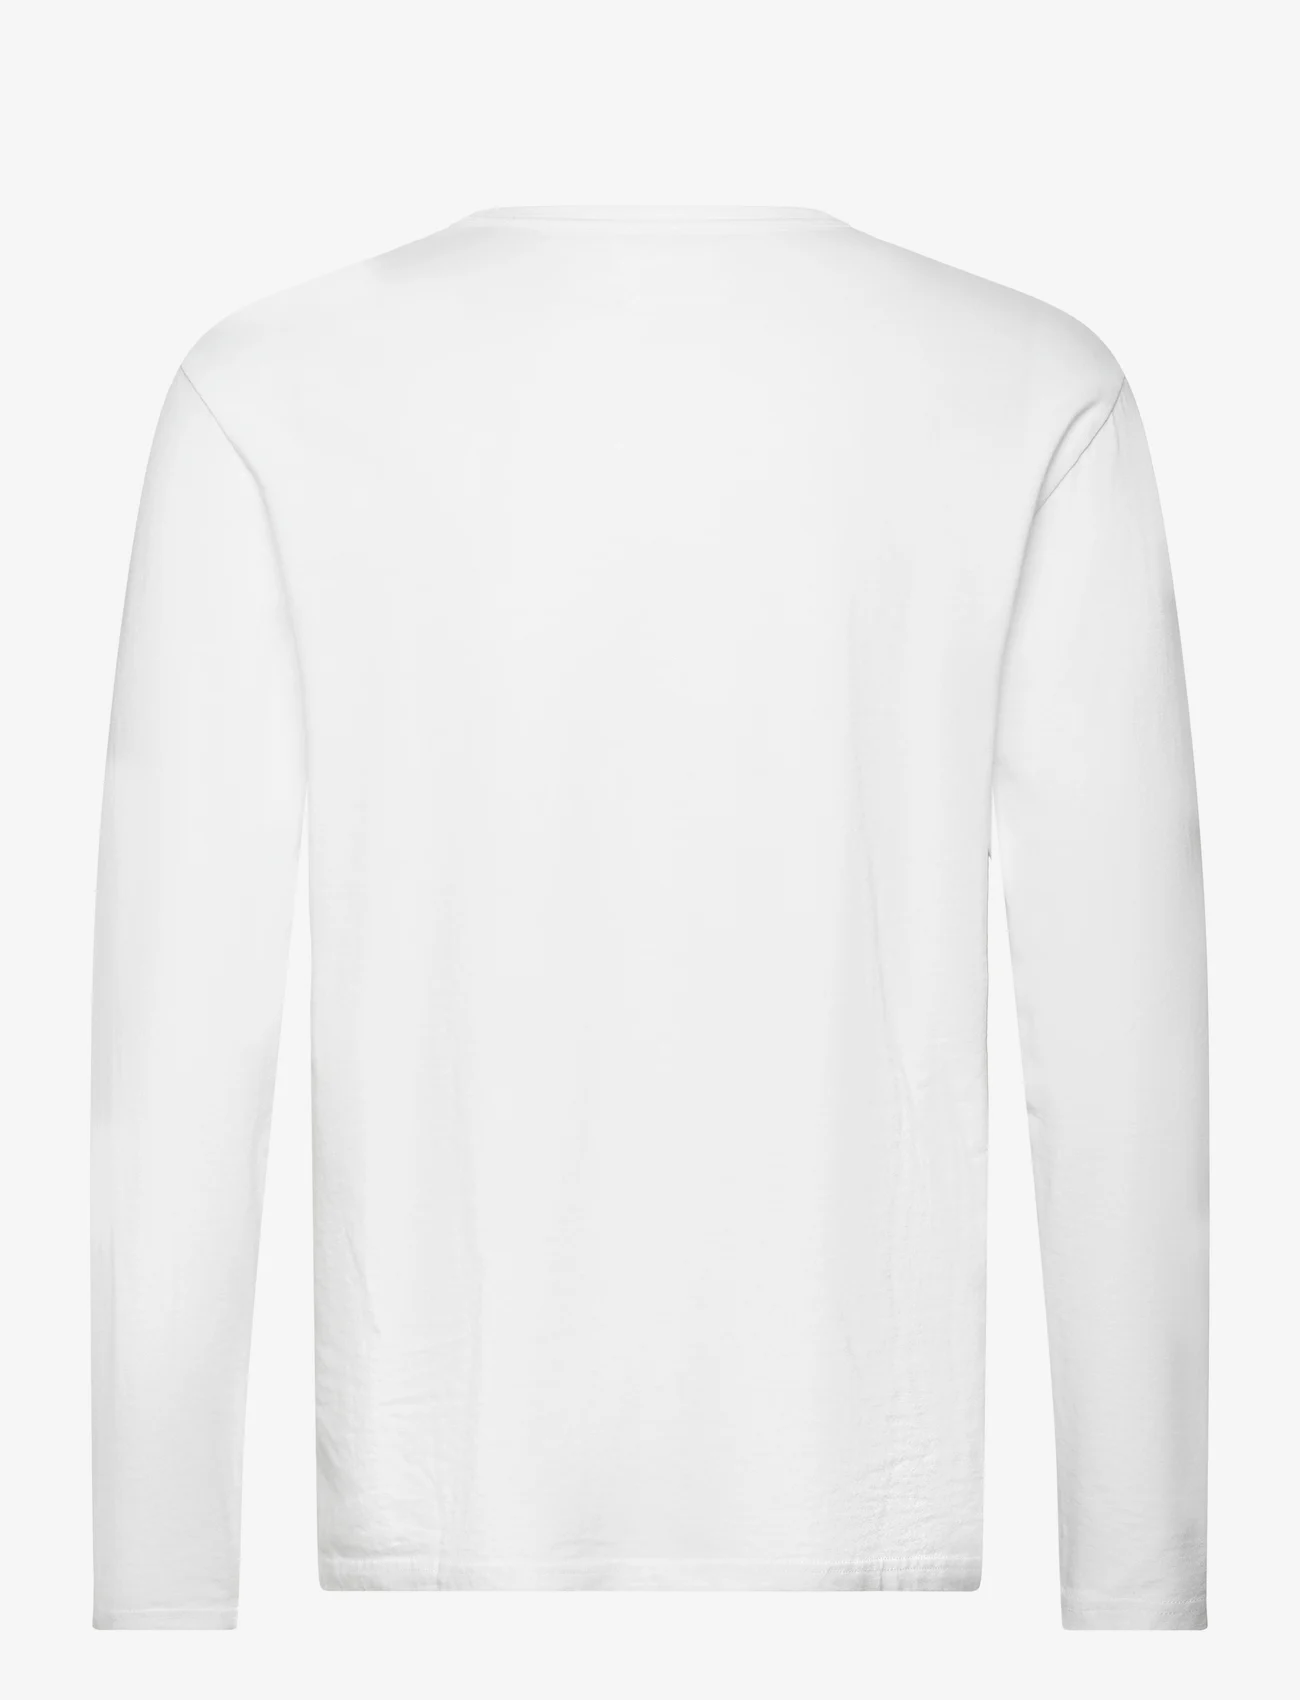 Double A by Wood Wood - Mel long sleeve GOTS - langærmede t-shirts - white/white - 1